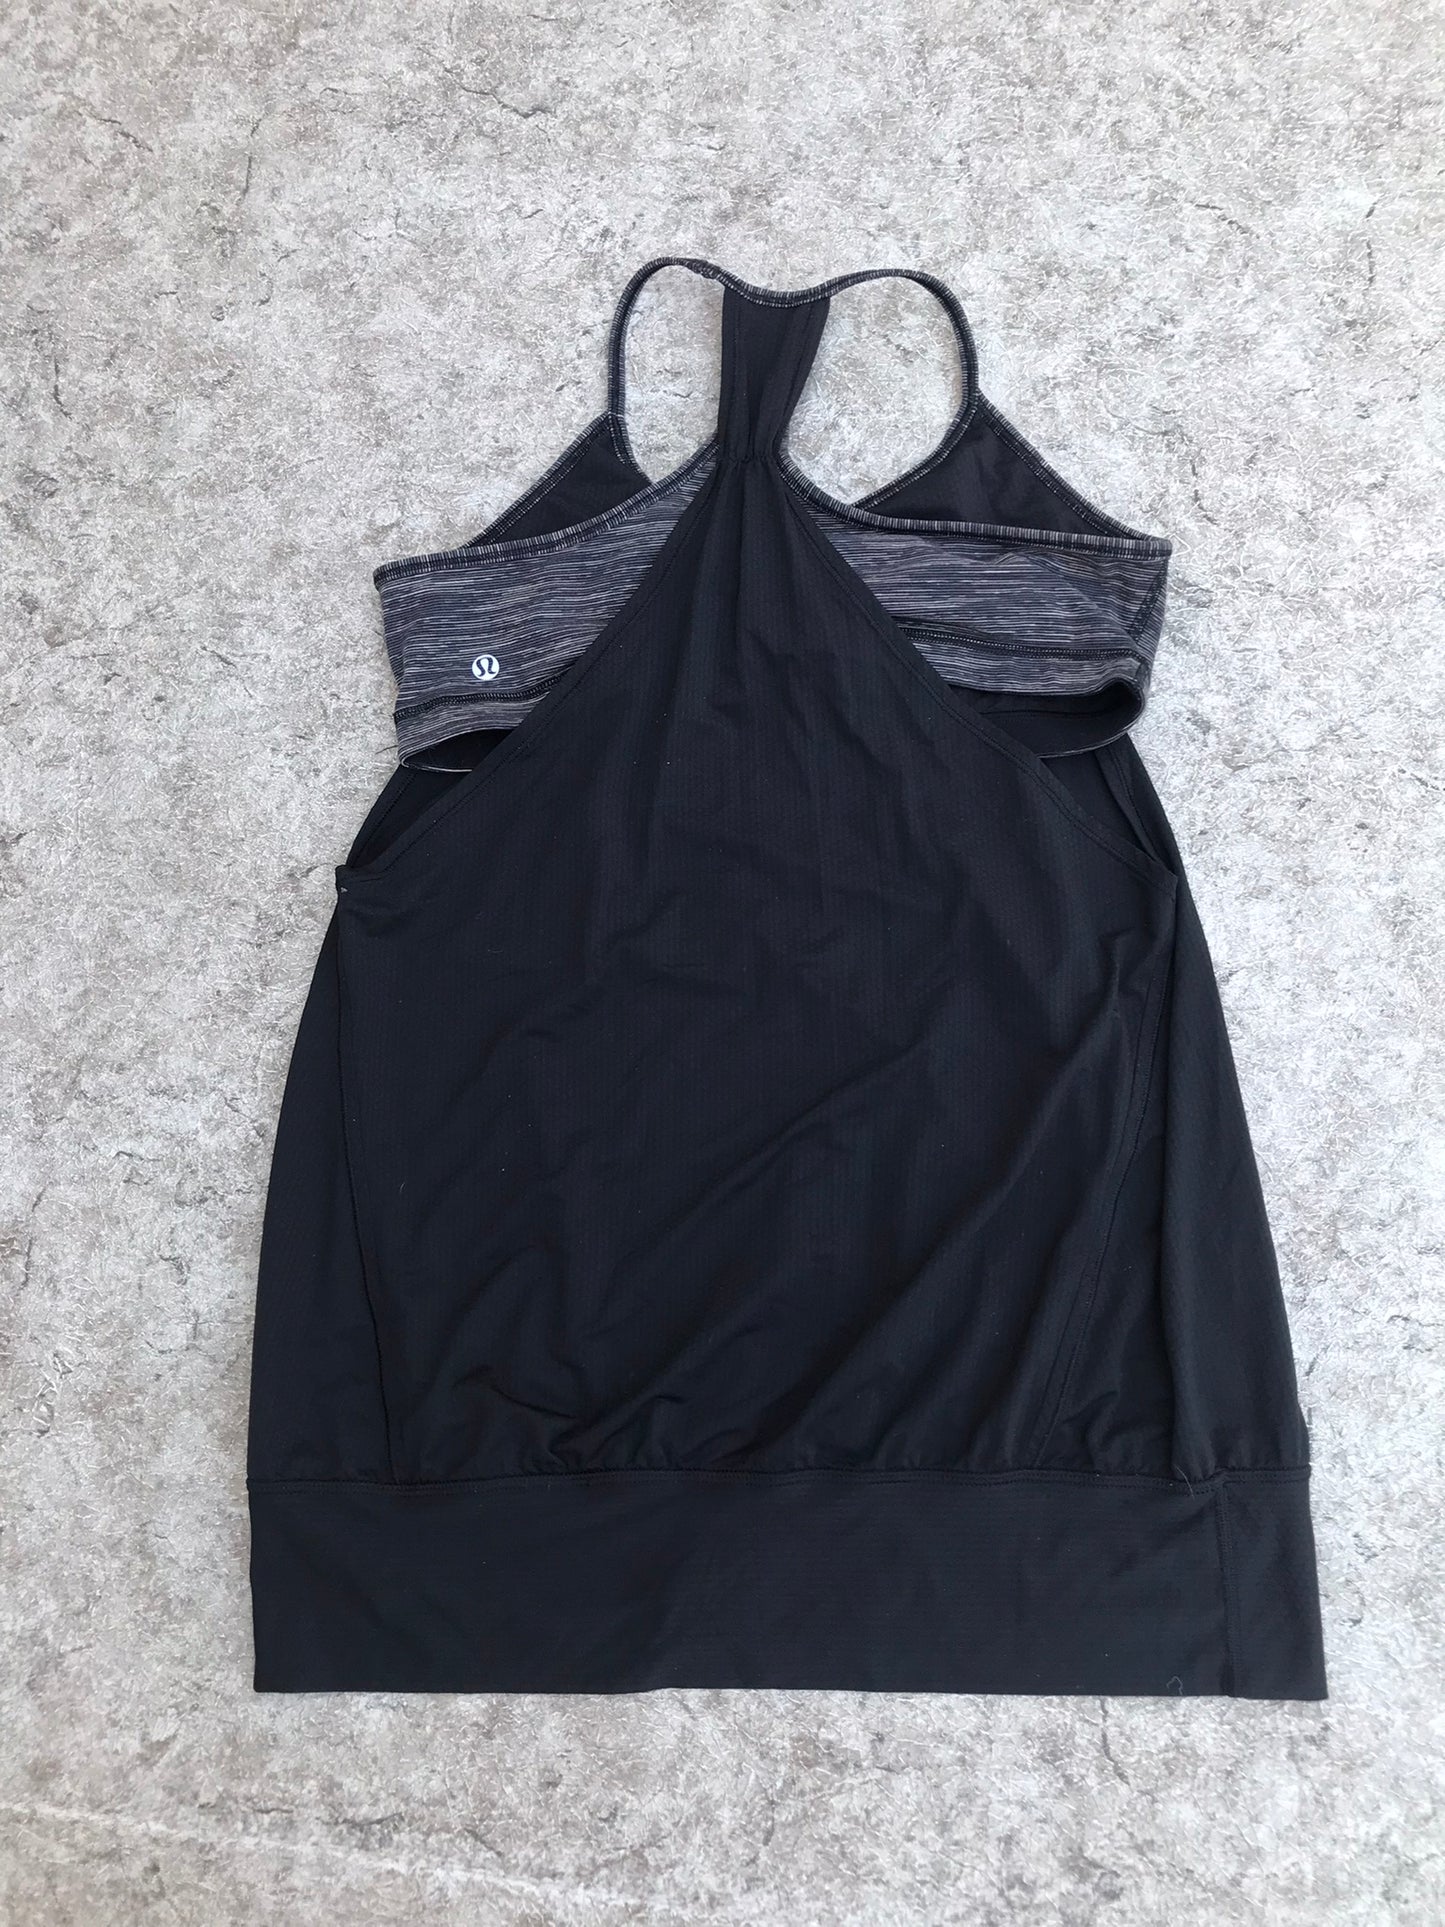 LuLuLemon Ladies Size Large With Support Bra Inside Yoga Workout Tank Top  Black Grey  Like New